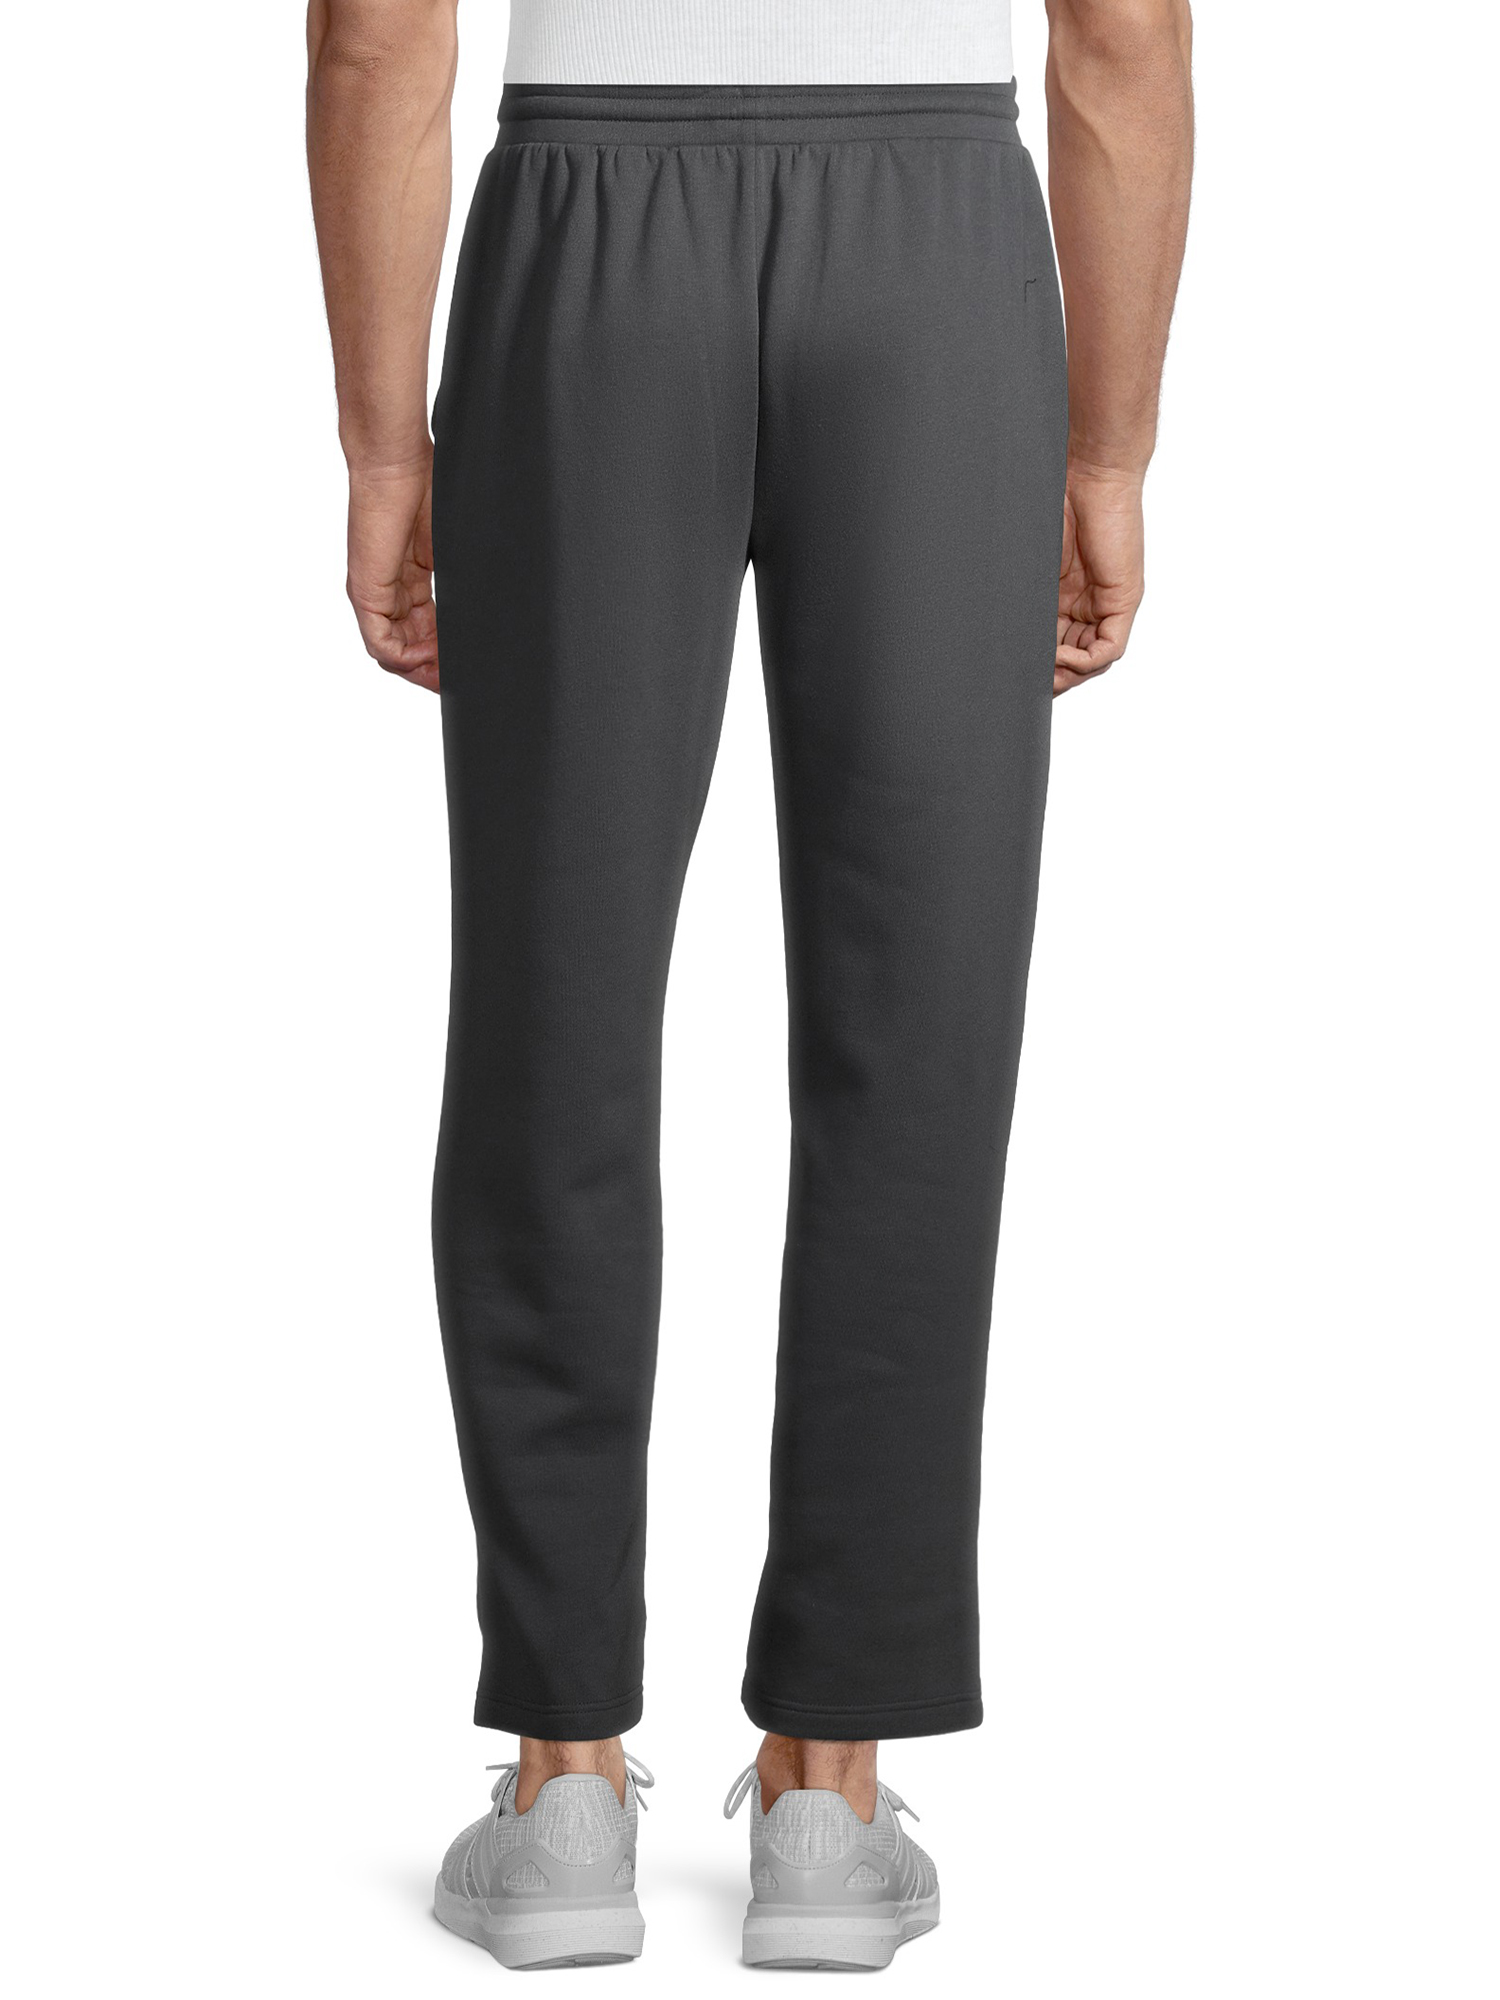 Athletic Works Men's Fleece Open Bottom Pants, up to Size 2XL - image 5 of 6